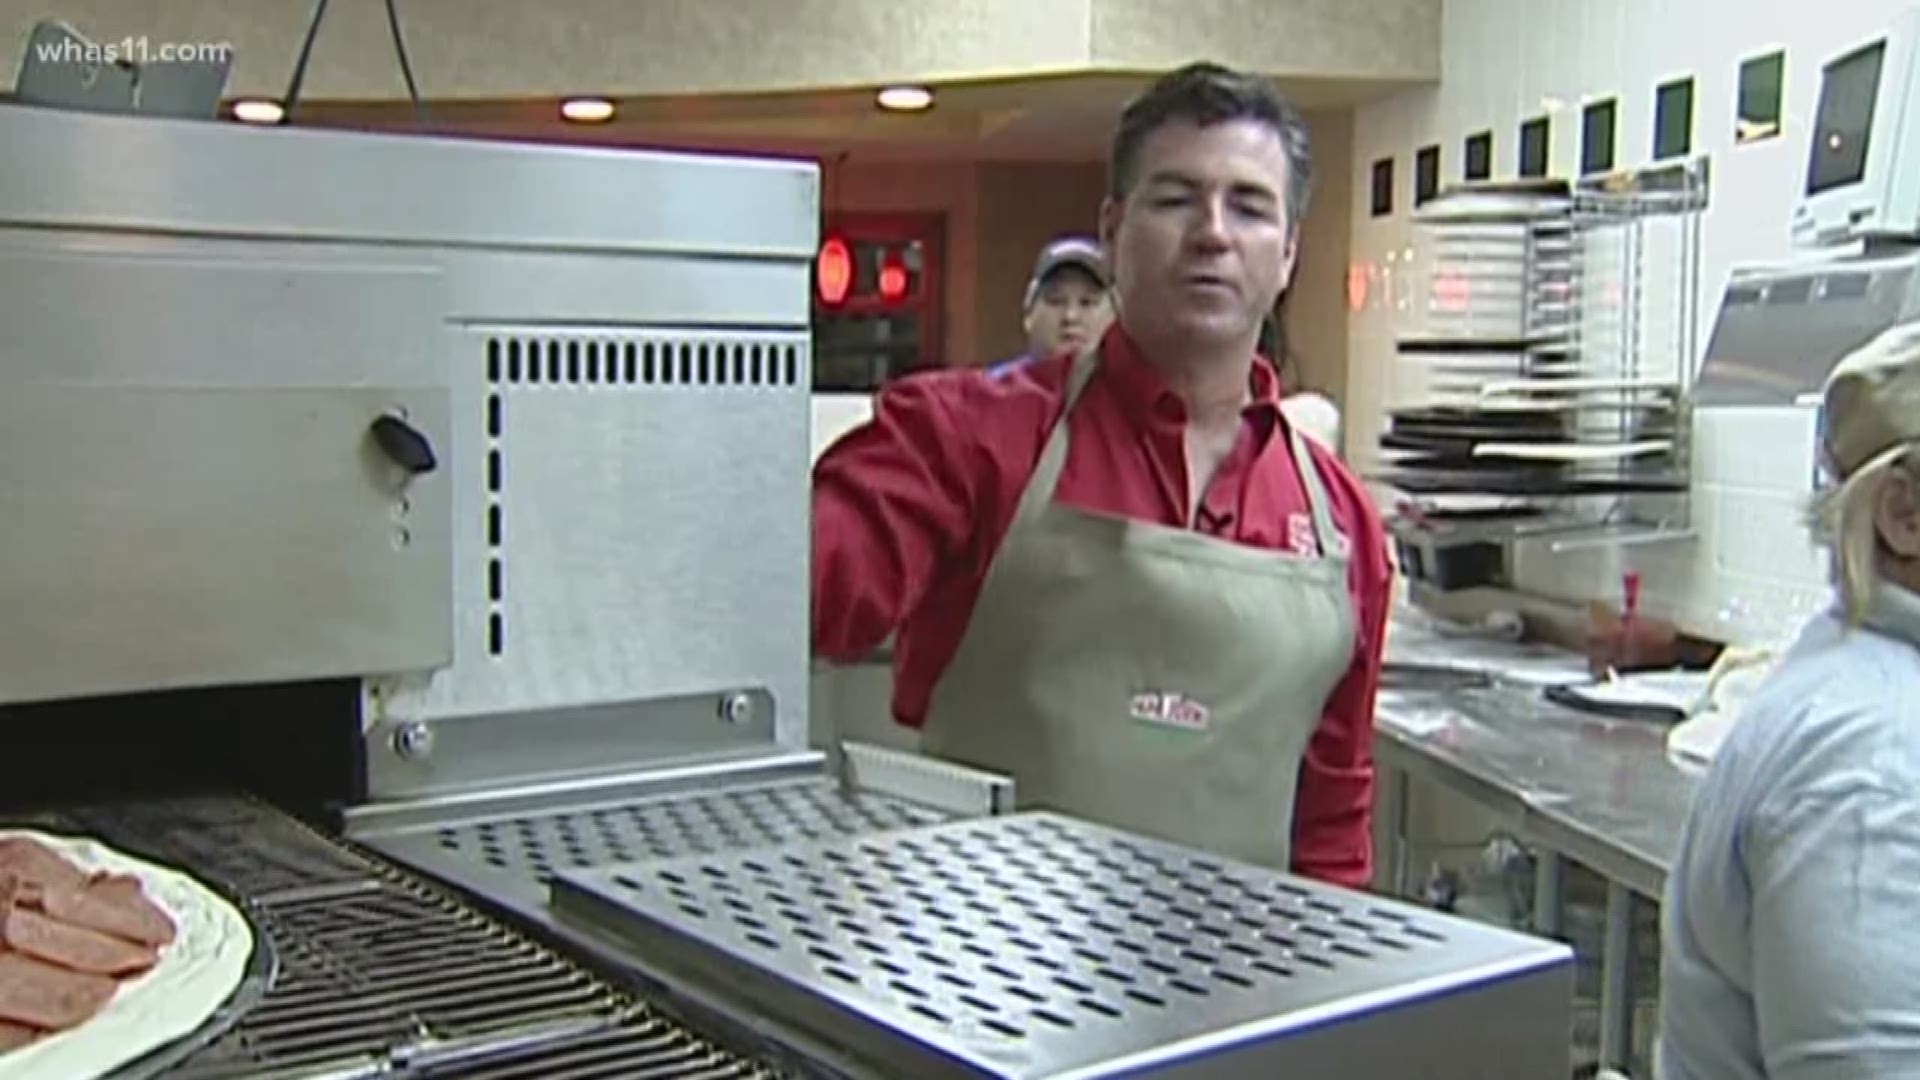 The company has taken a blow following the resignation of chairman and founder John Schnatter